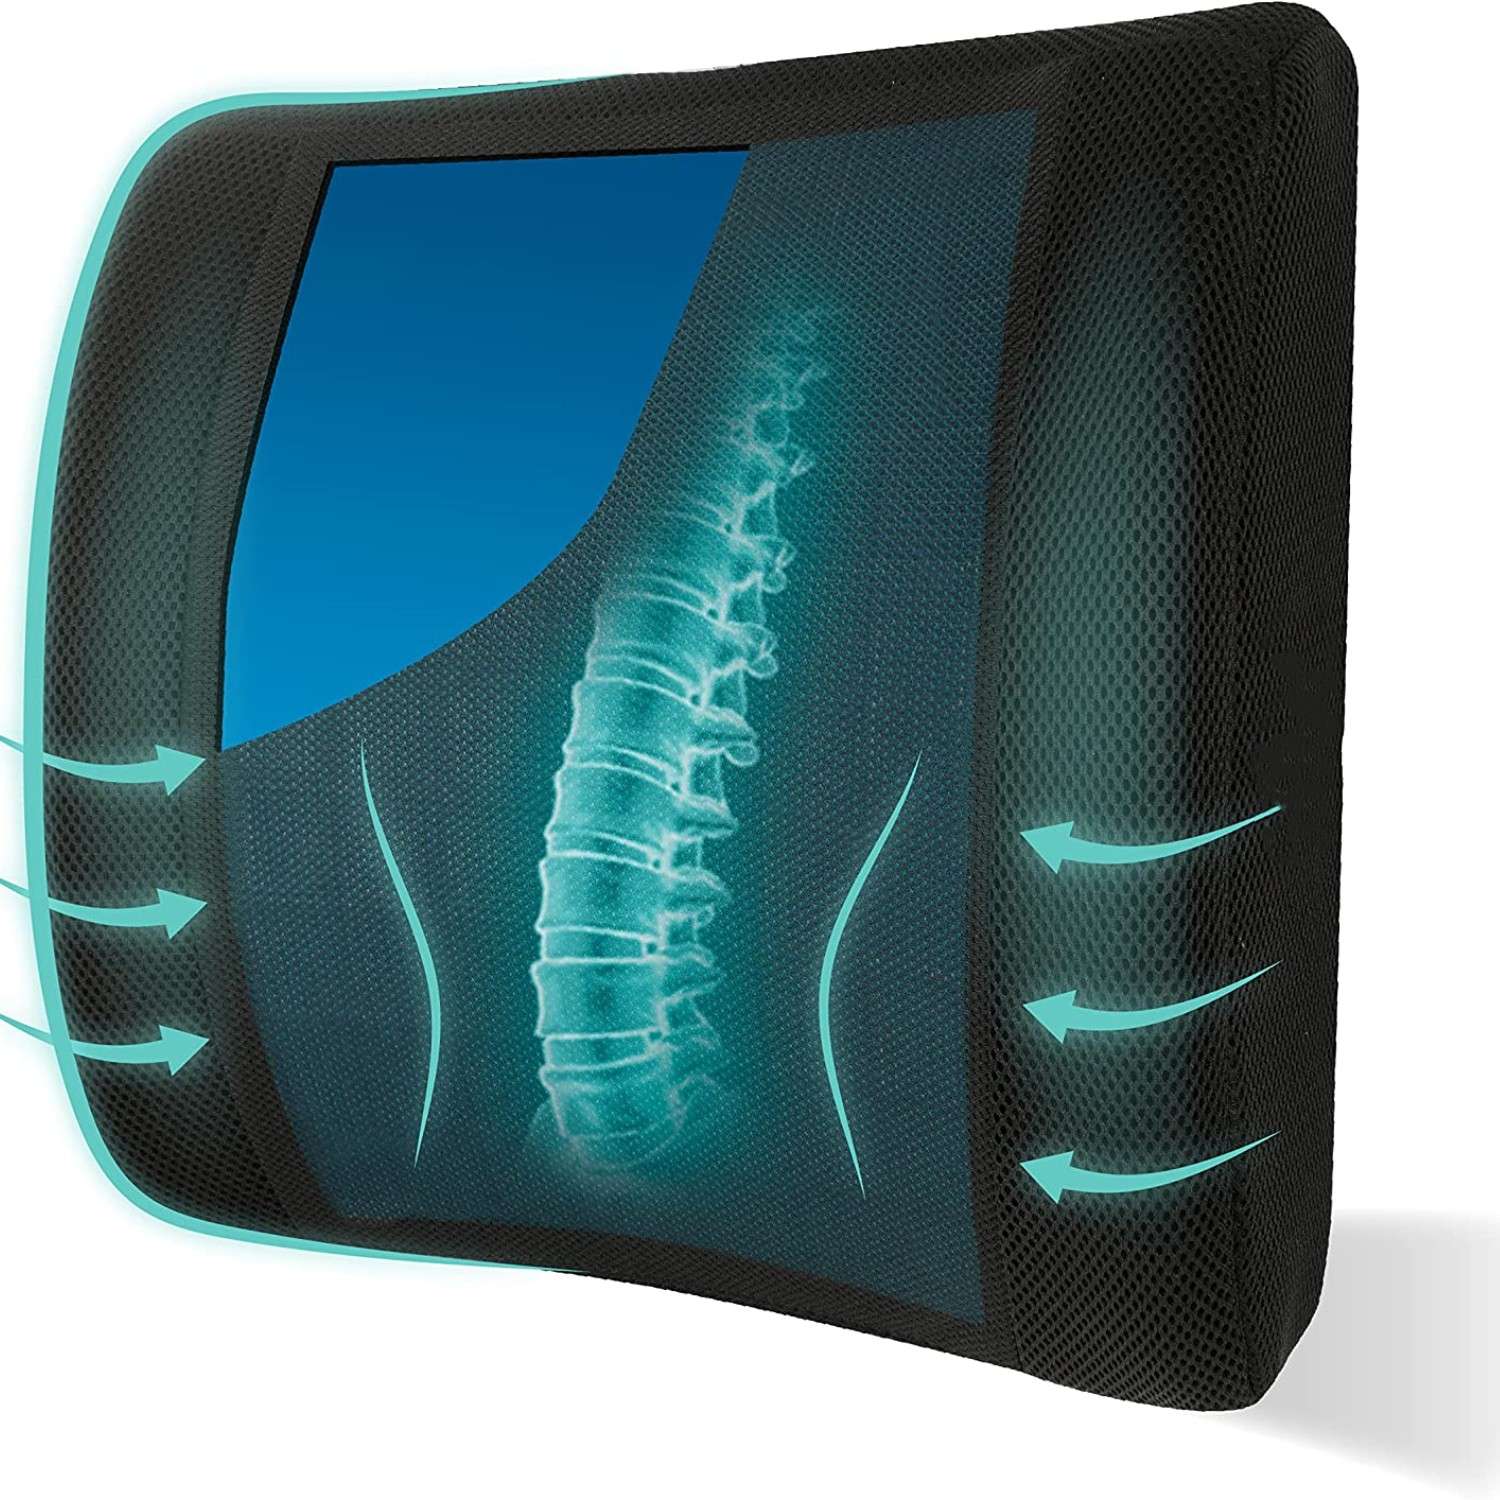 Cooling Gel Seat Cushion for Relaxation and Comfort